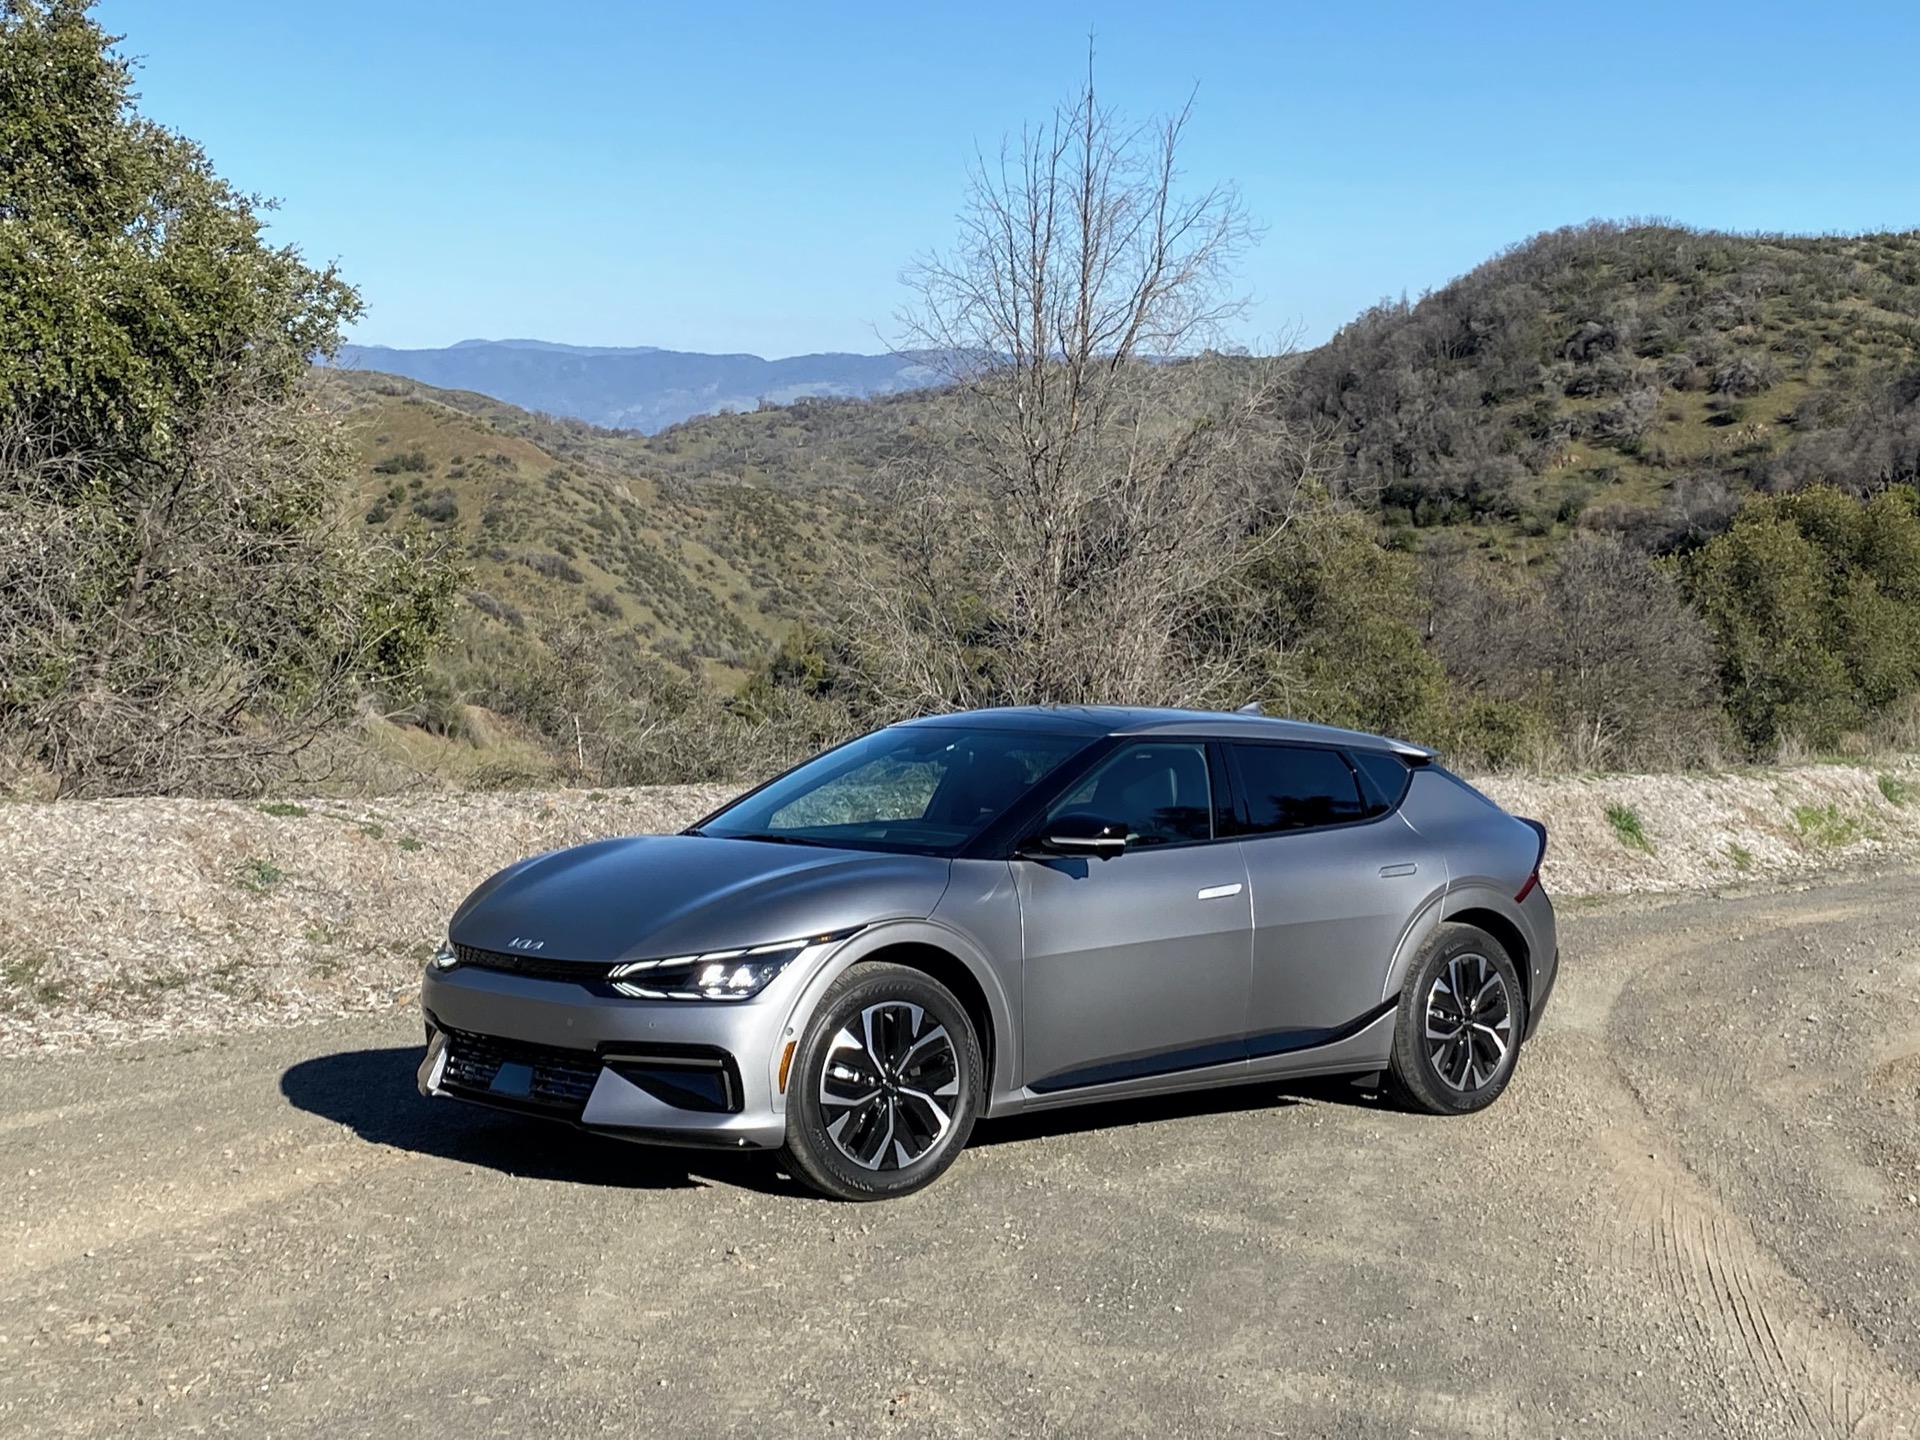 First drive review: 2022 Kia EV6 electric car is a hoot, and it